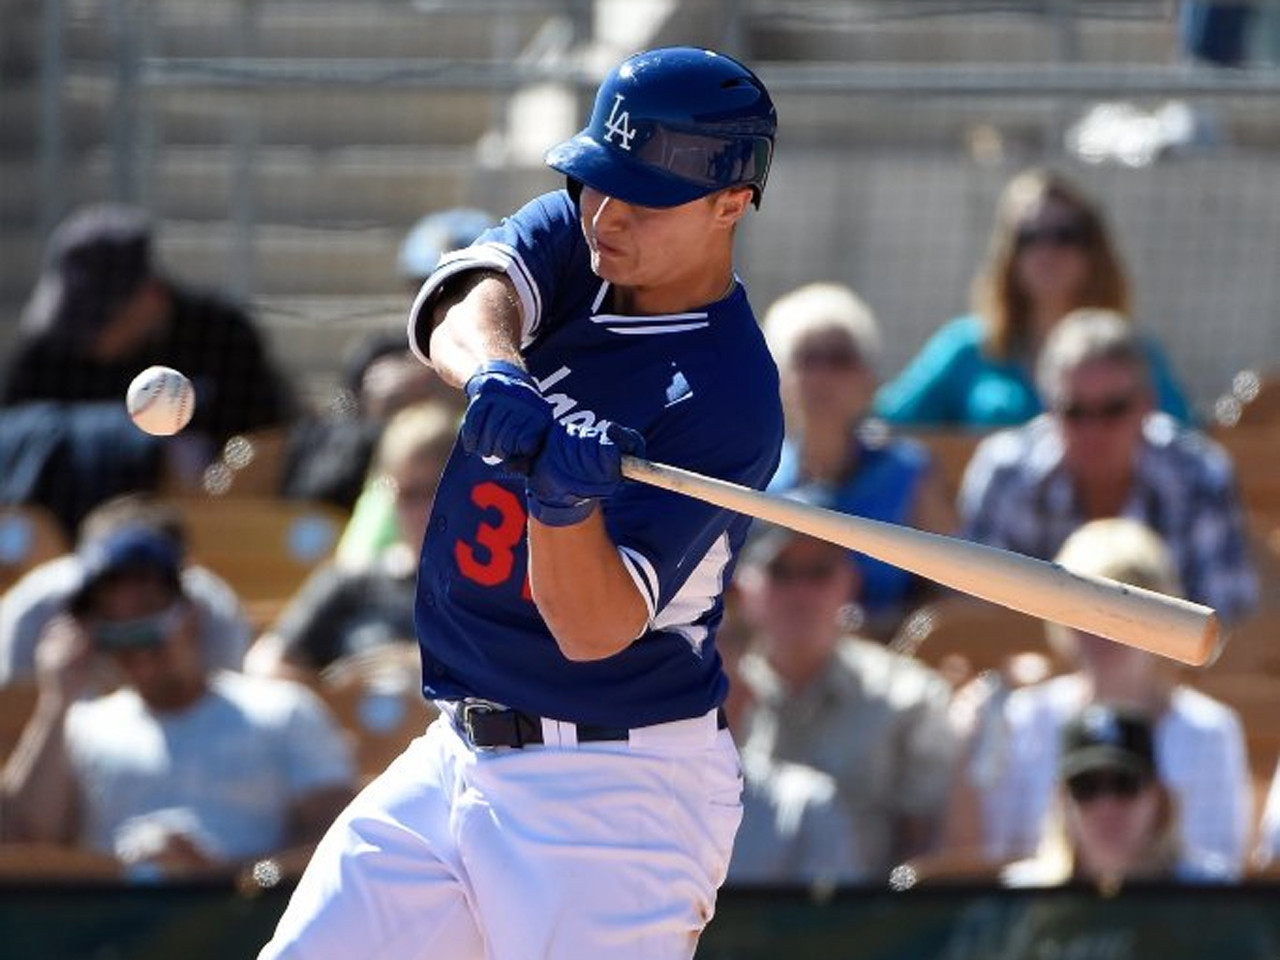 Joc Pederson is center of attention for Dodgers this spring - LA Times